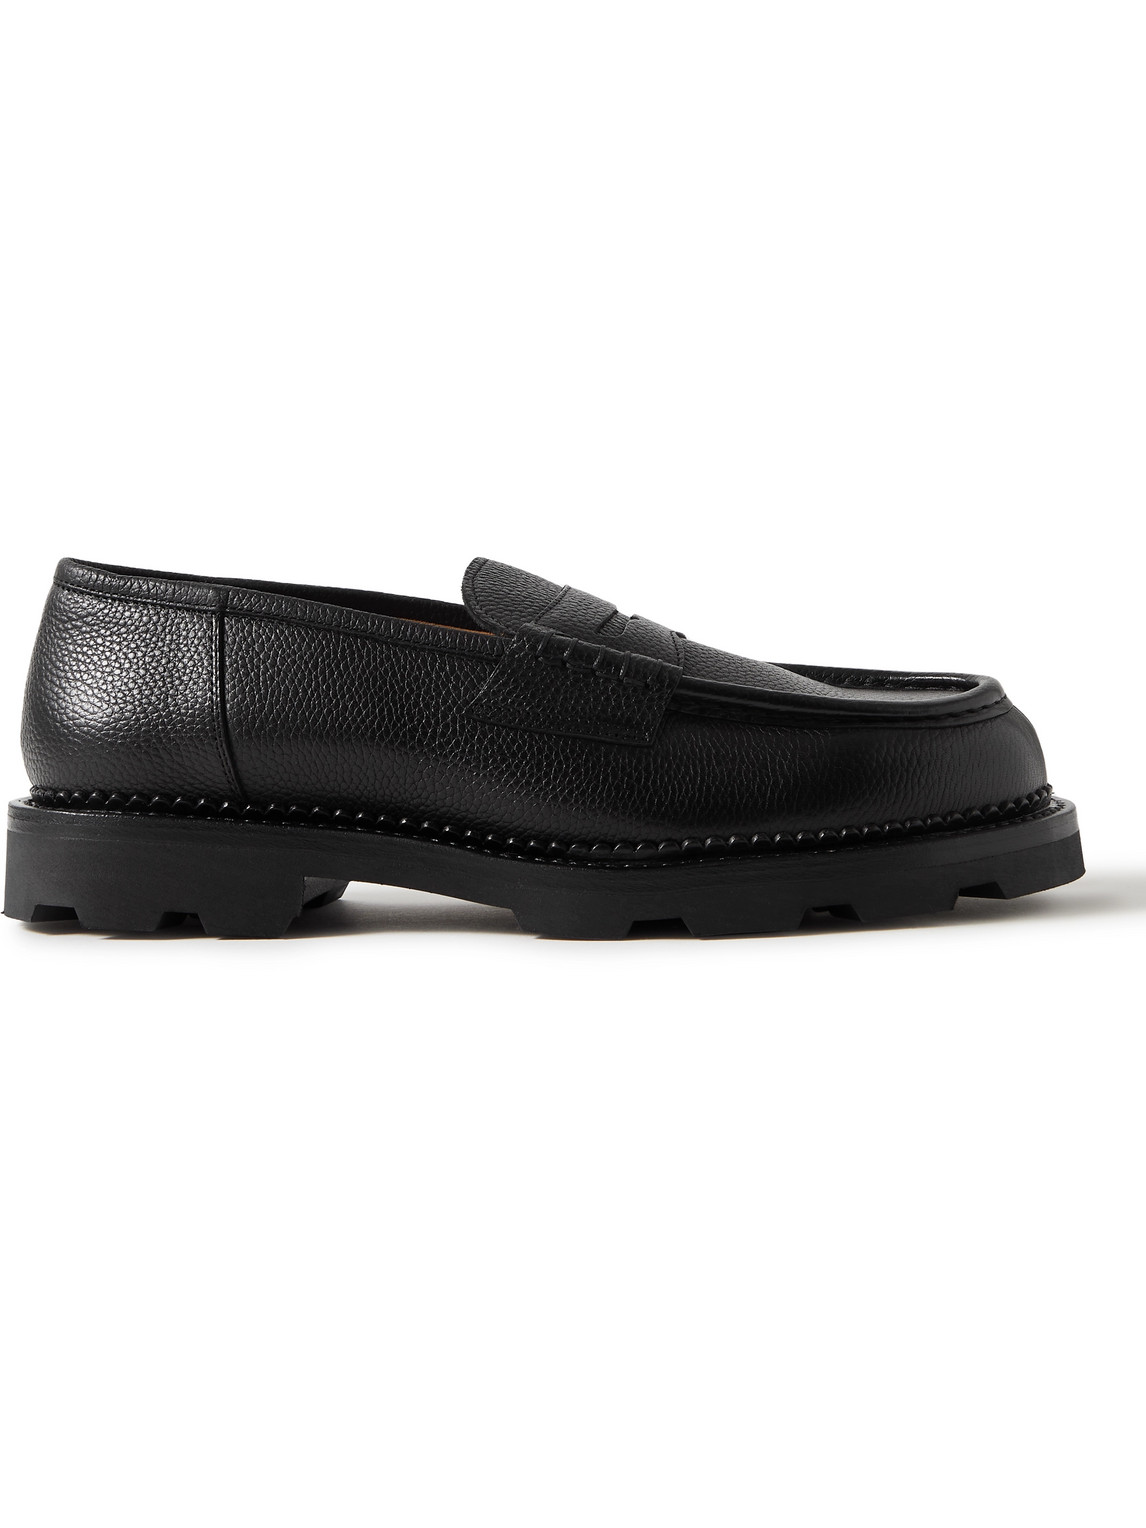 Frentaly Pebble-Grain Leather Penny Loafers